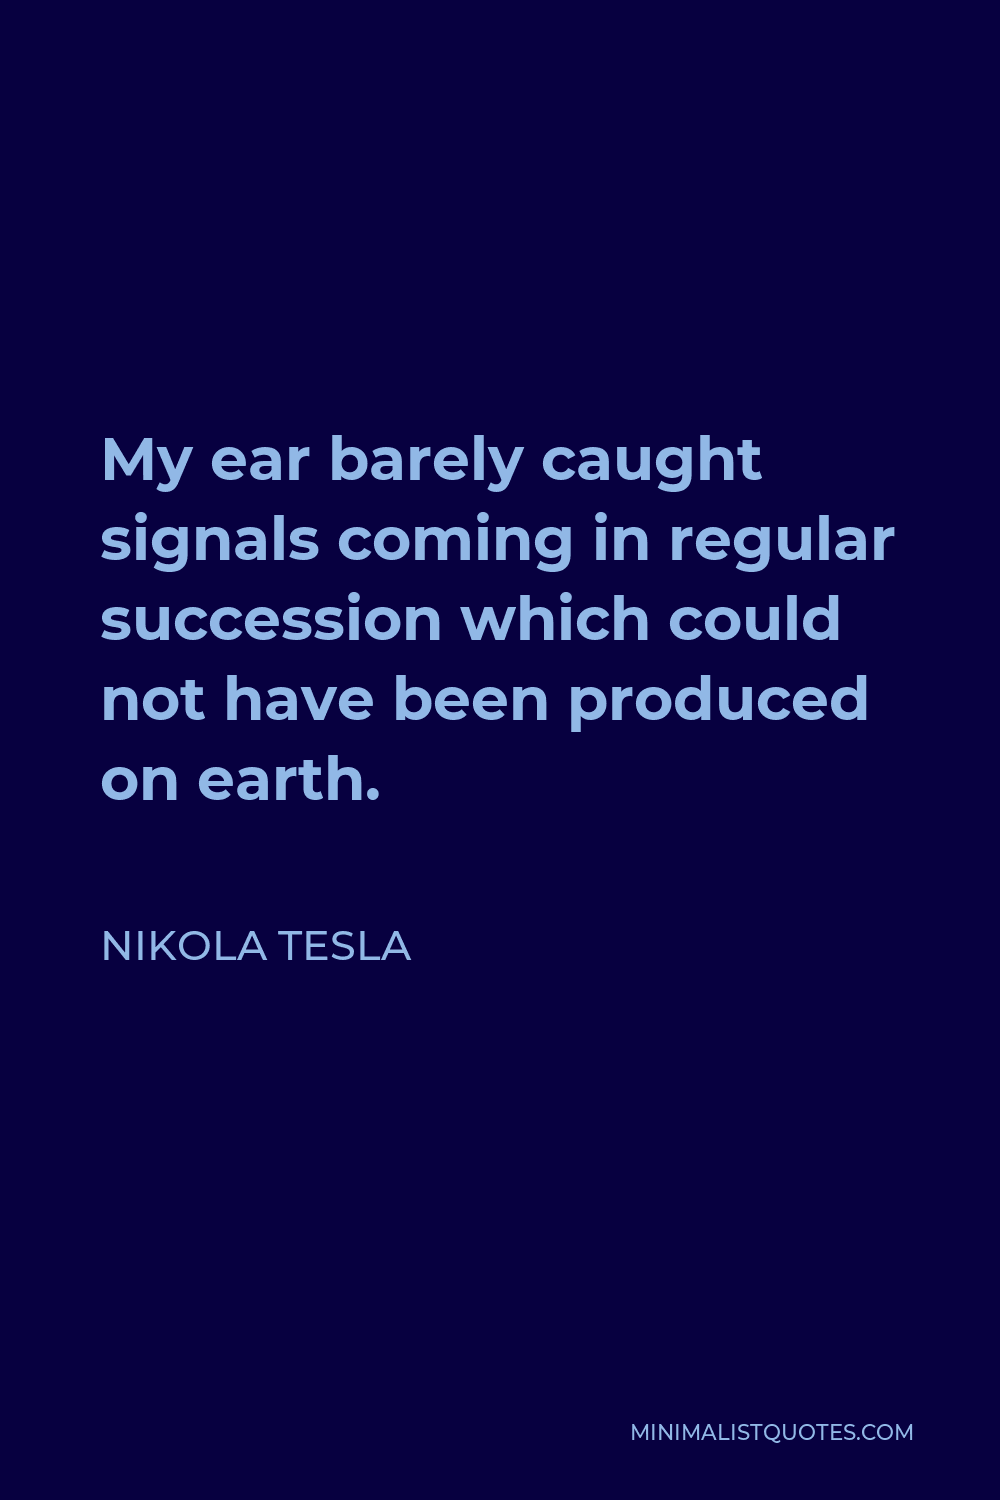 Nikola Tesla Quote - My ear barely caught signals coming in regular succession which could not have been produced on earth.